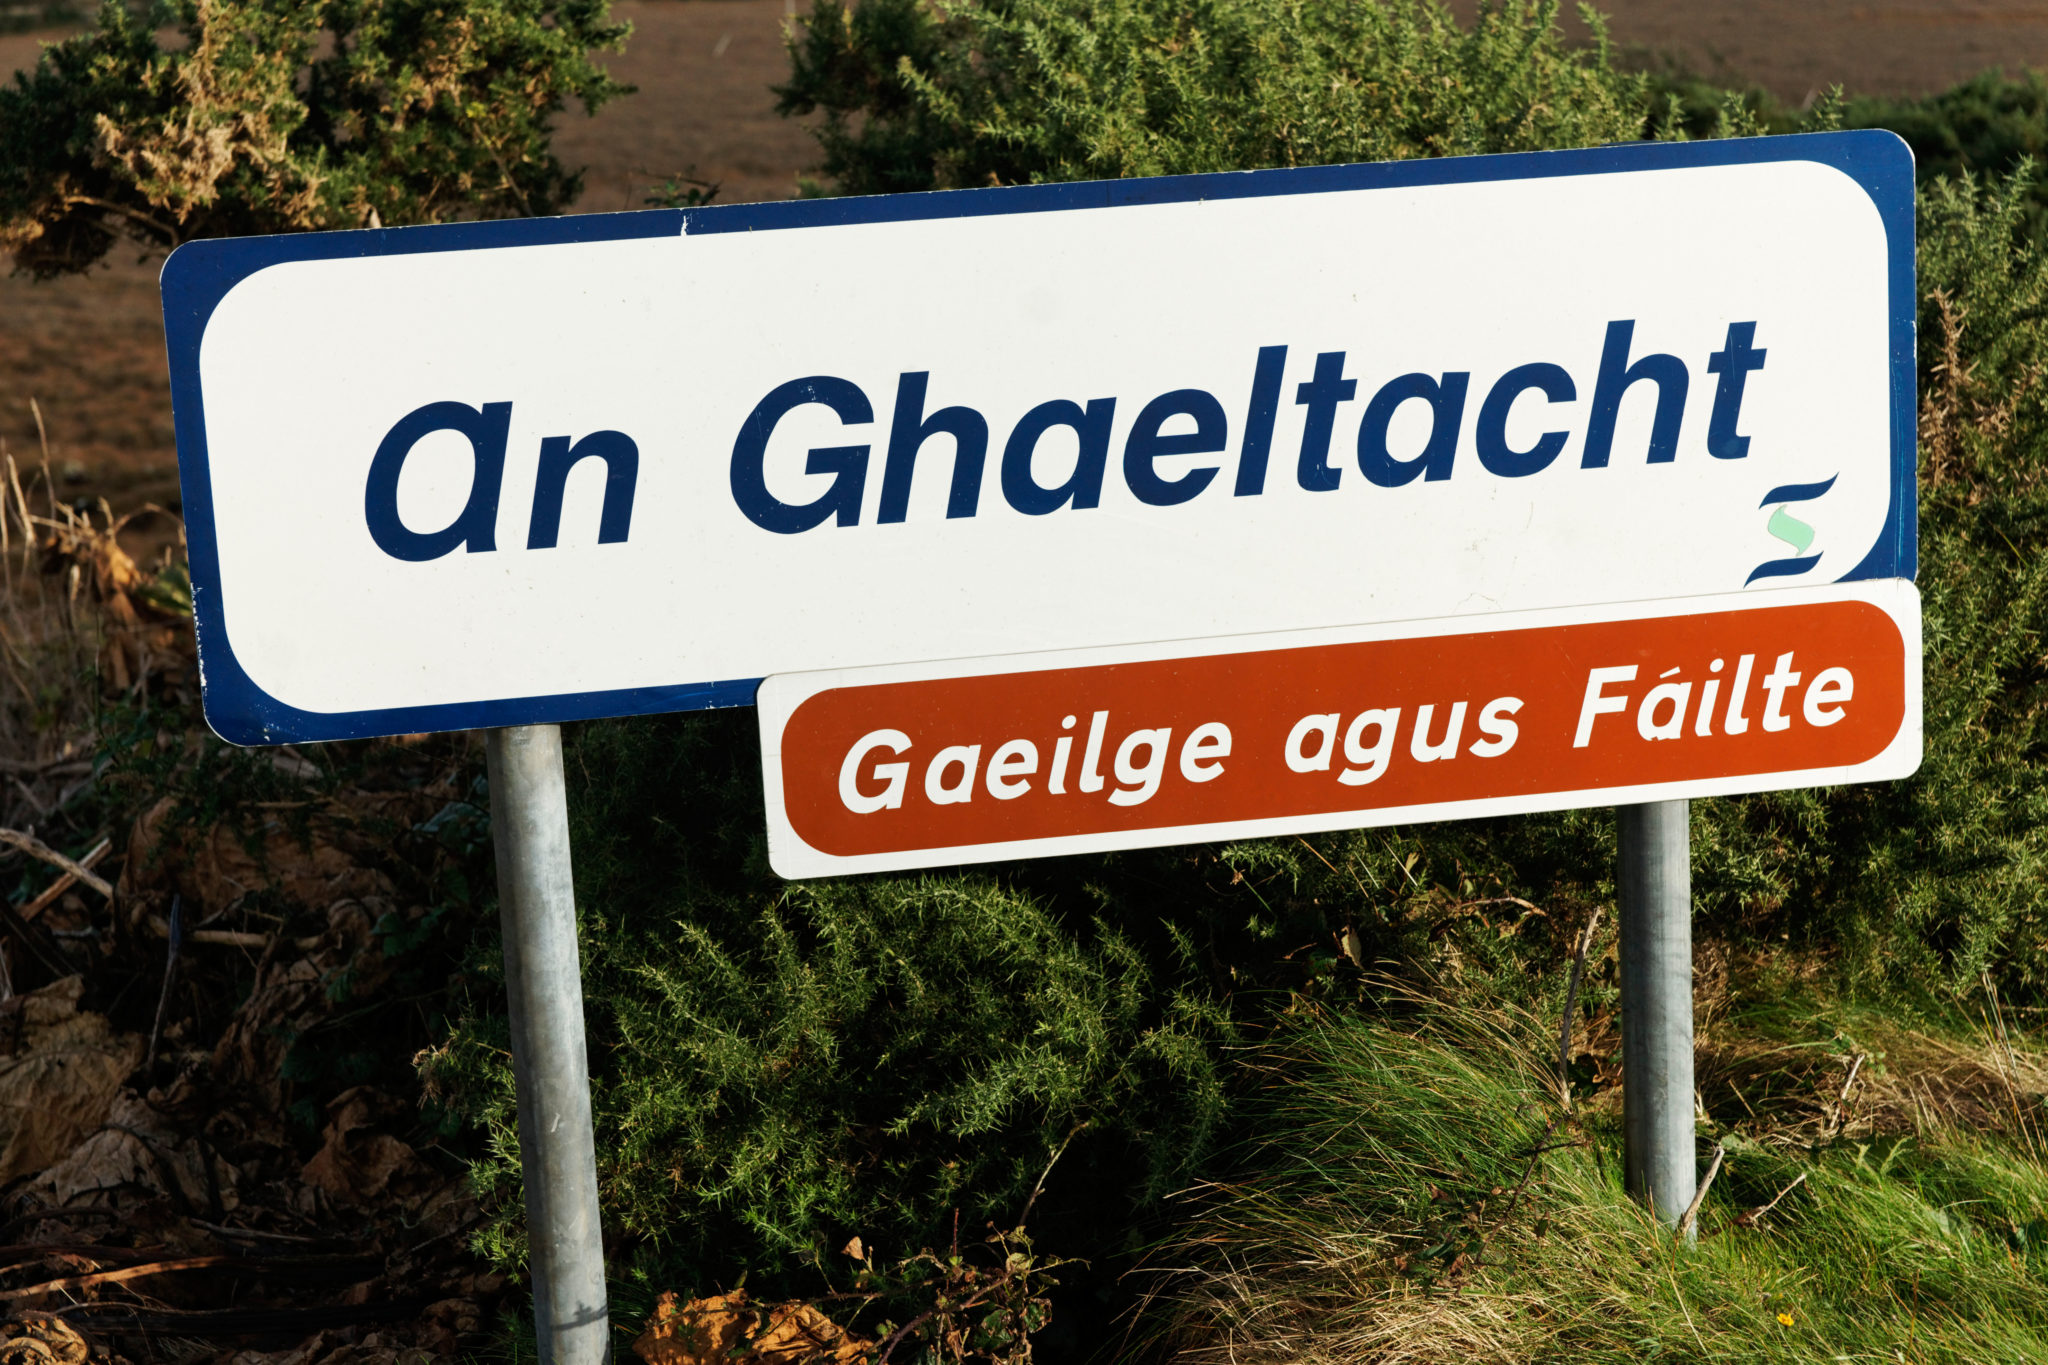 A sign in the Gaeltacht